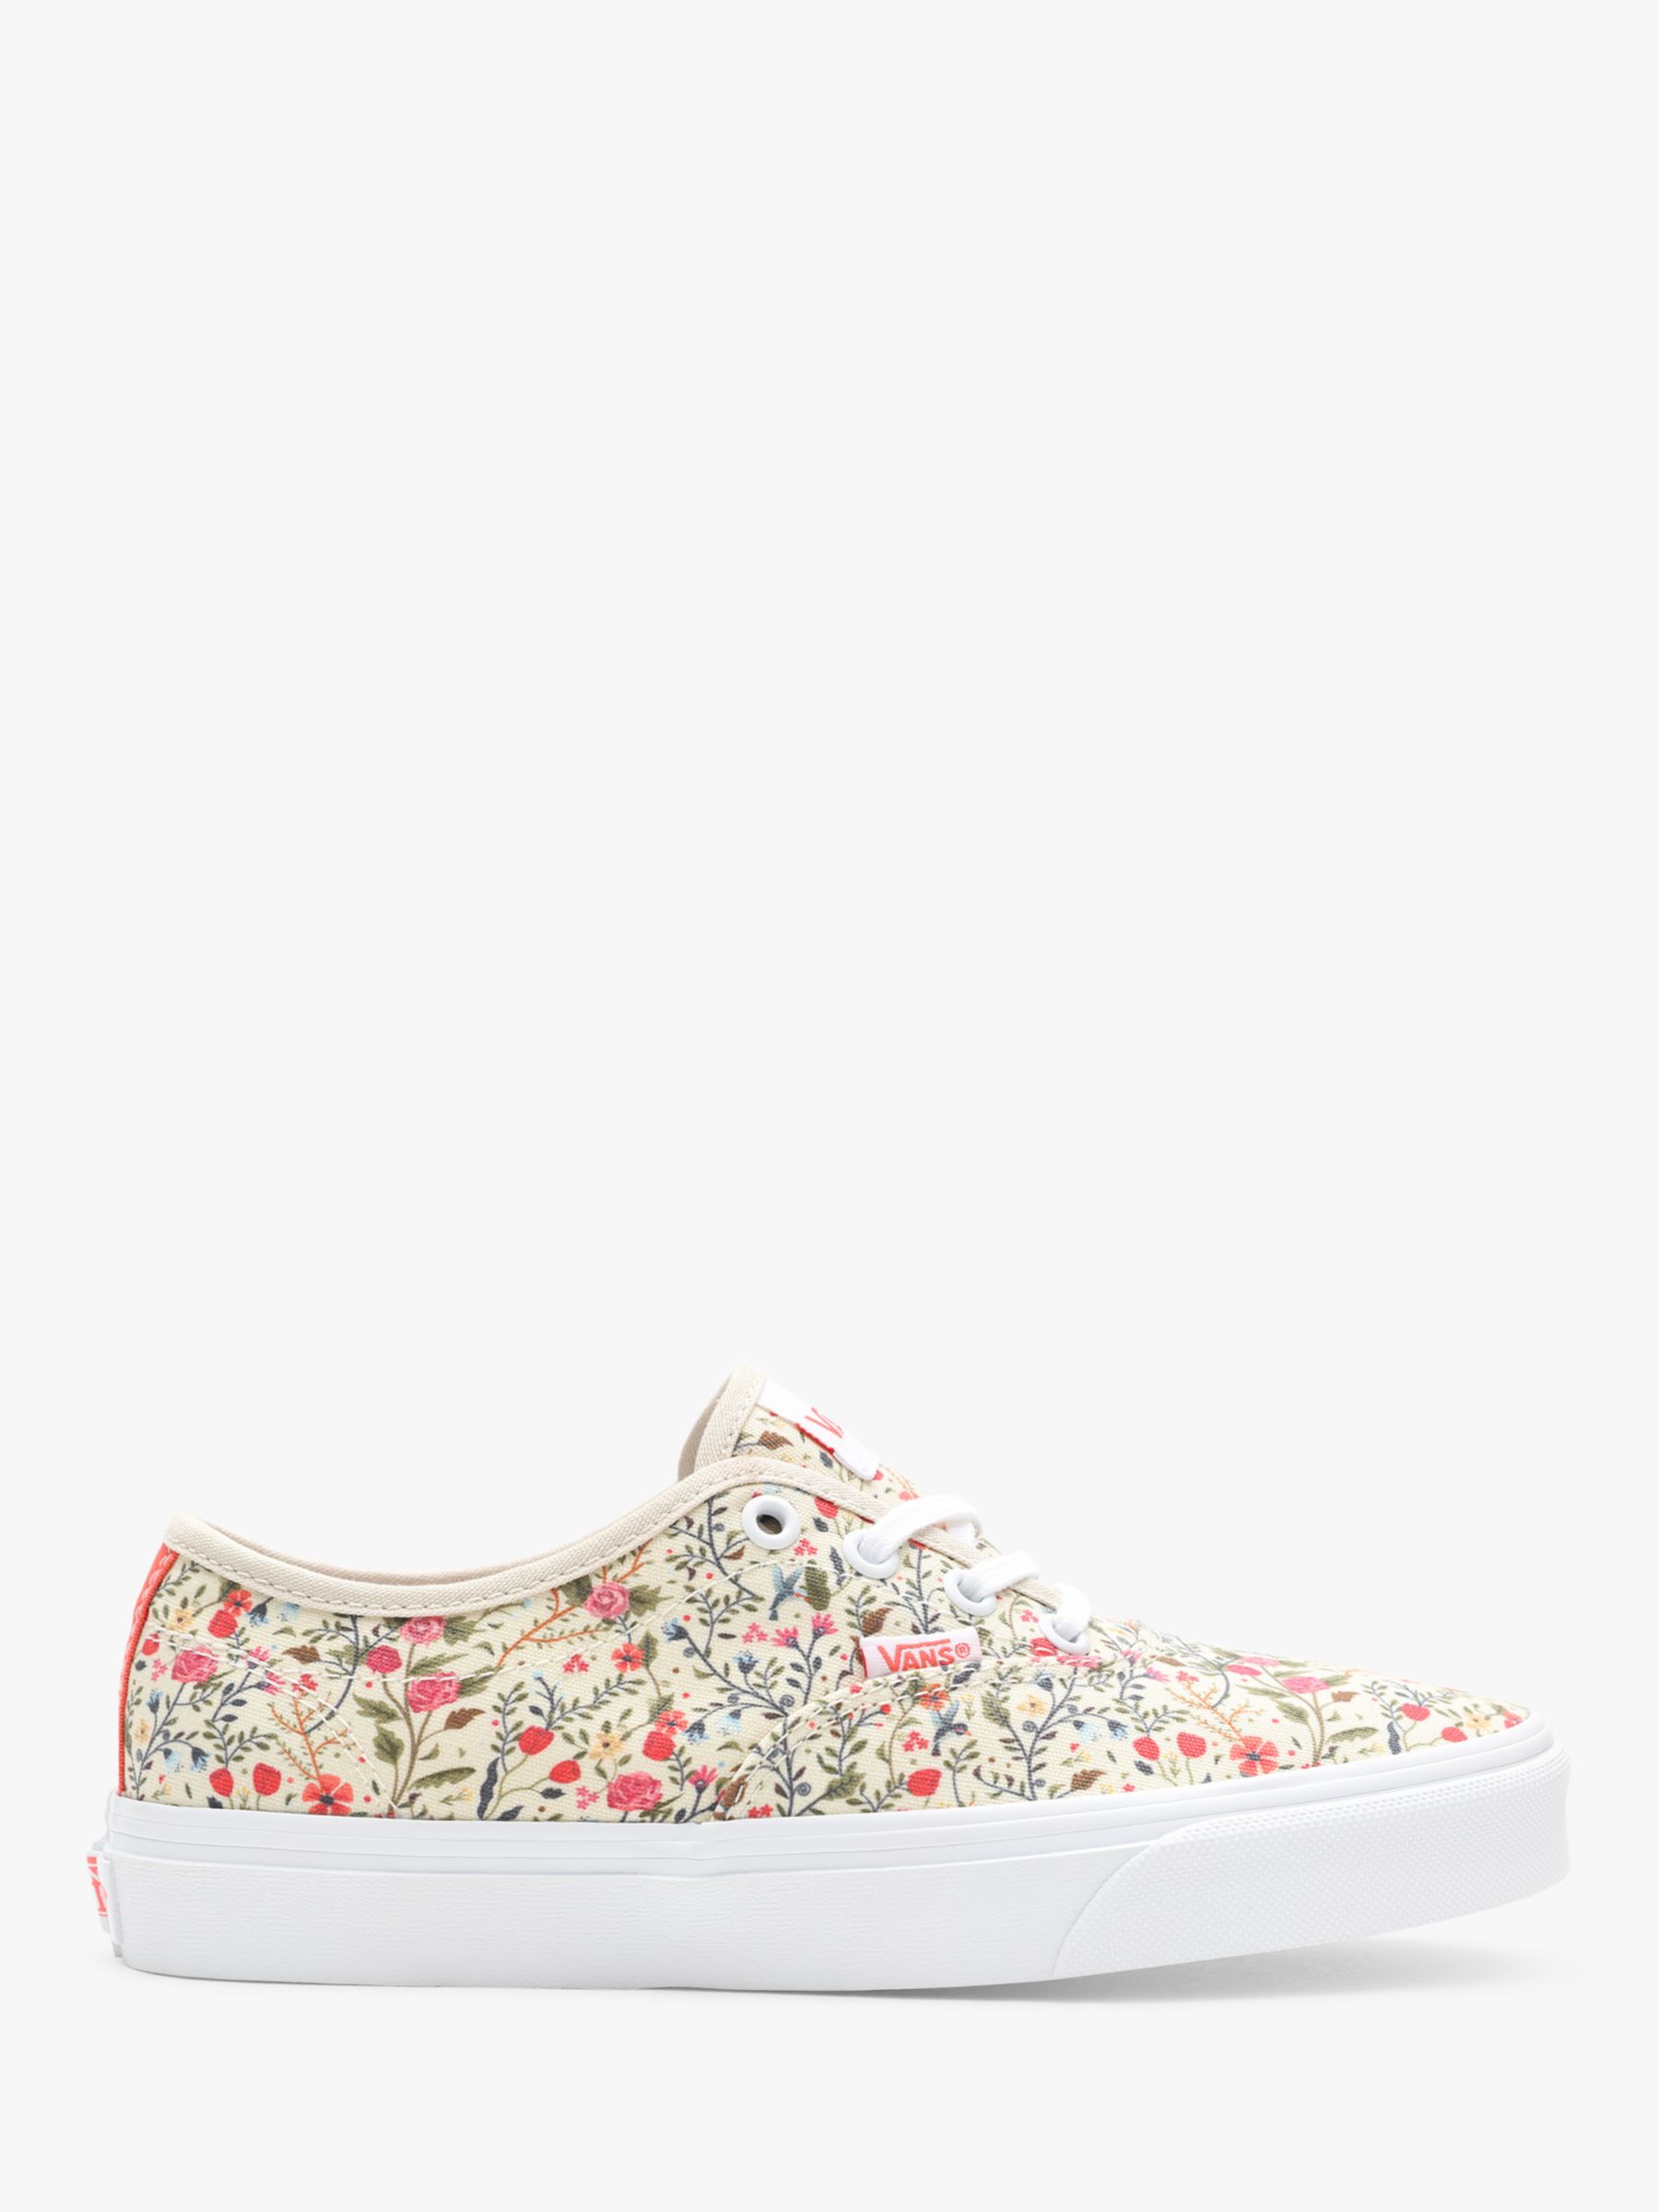 Vans Doheny Floral Print Canvas Lace Up Trainers, Turtle Dove White at ...